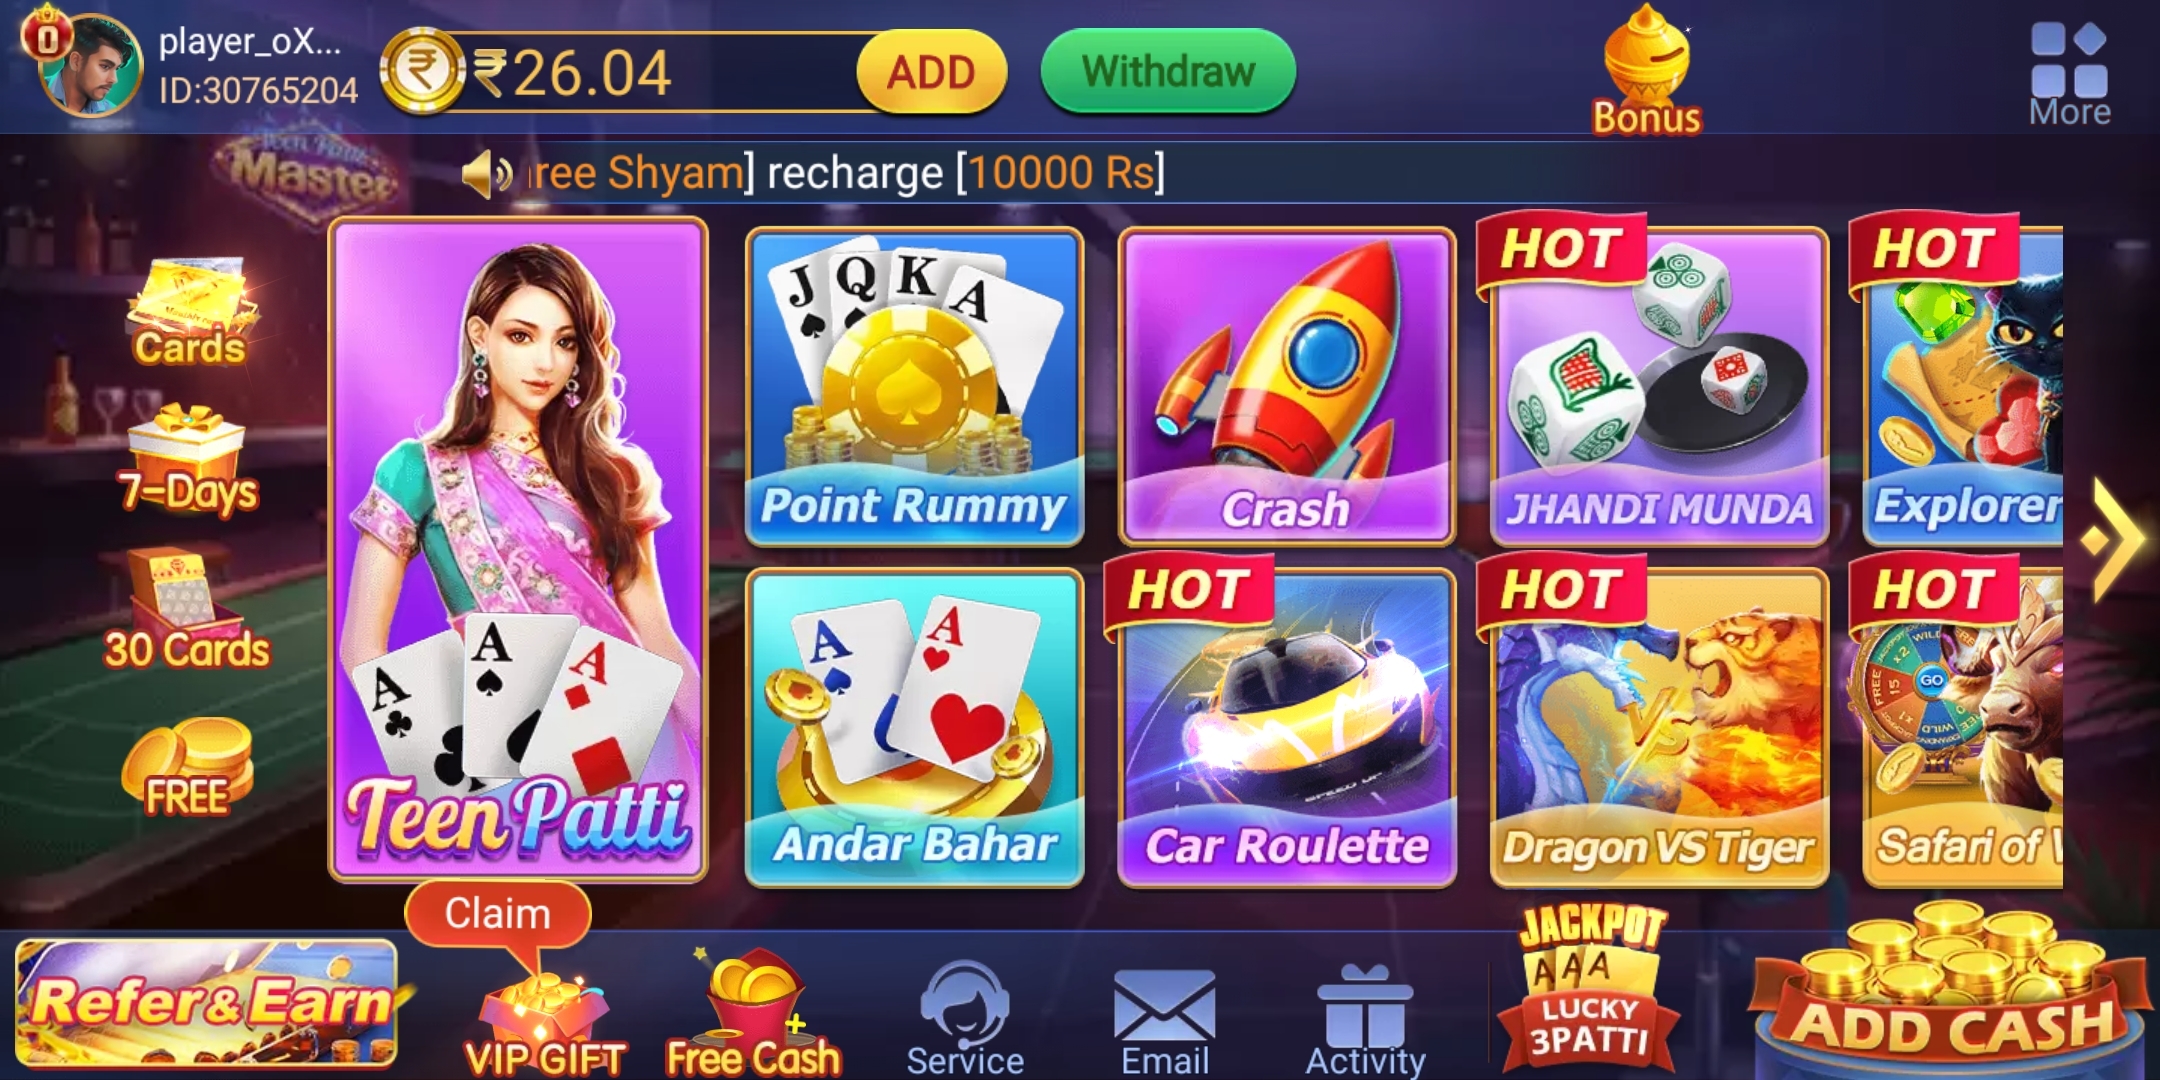 How Many Types of Games Available in Teen Patti Master Mod APK